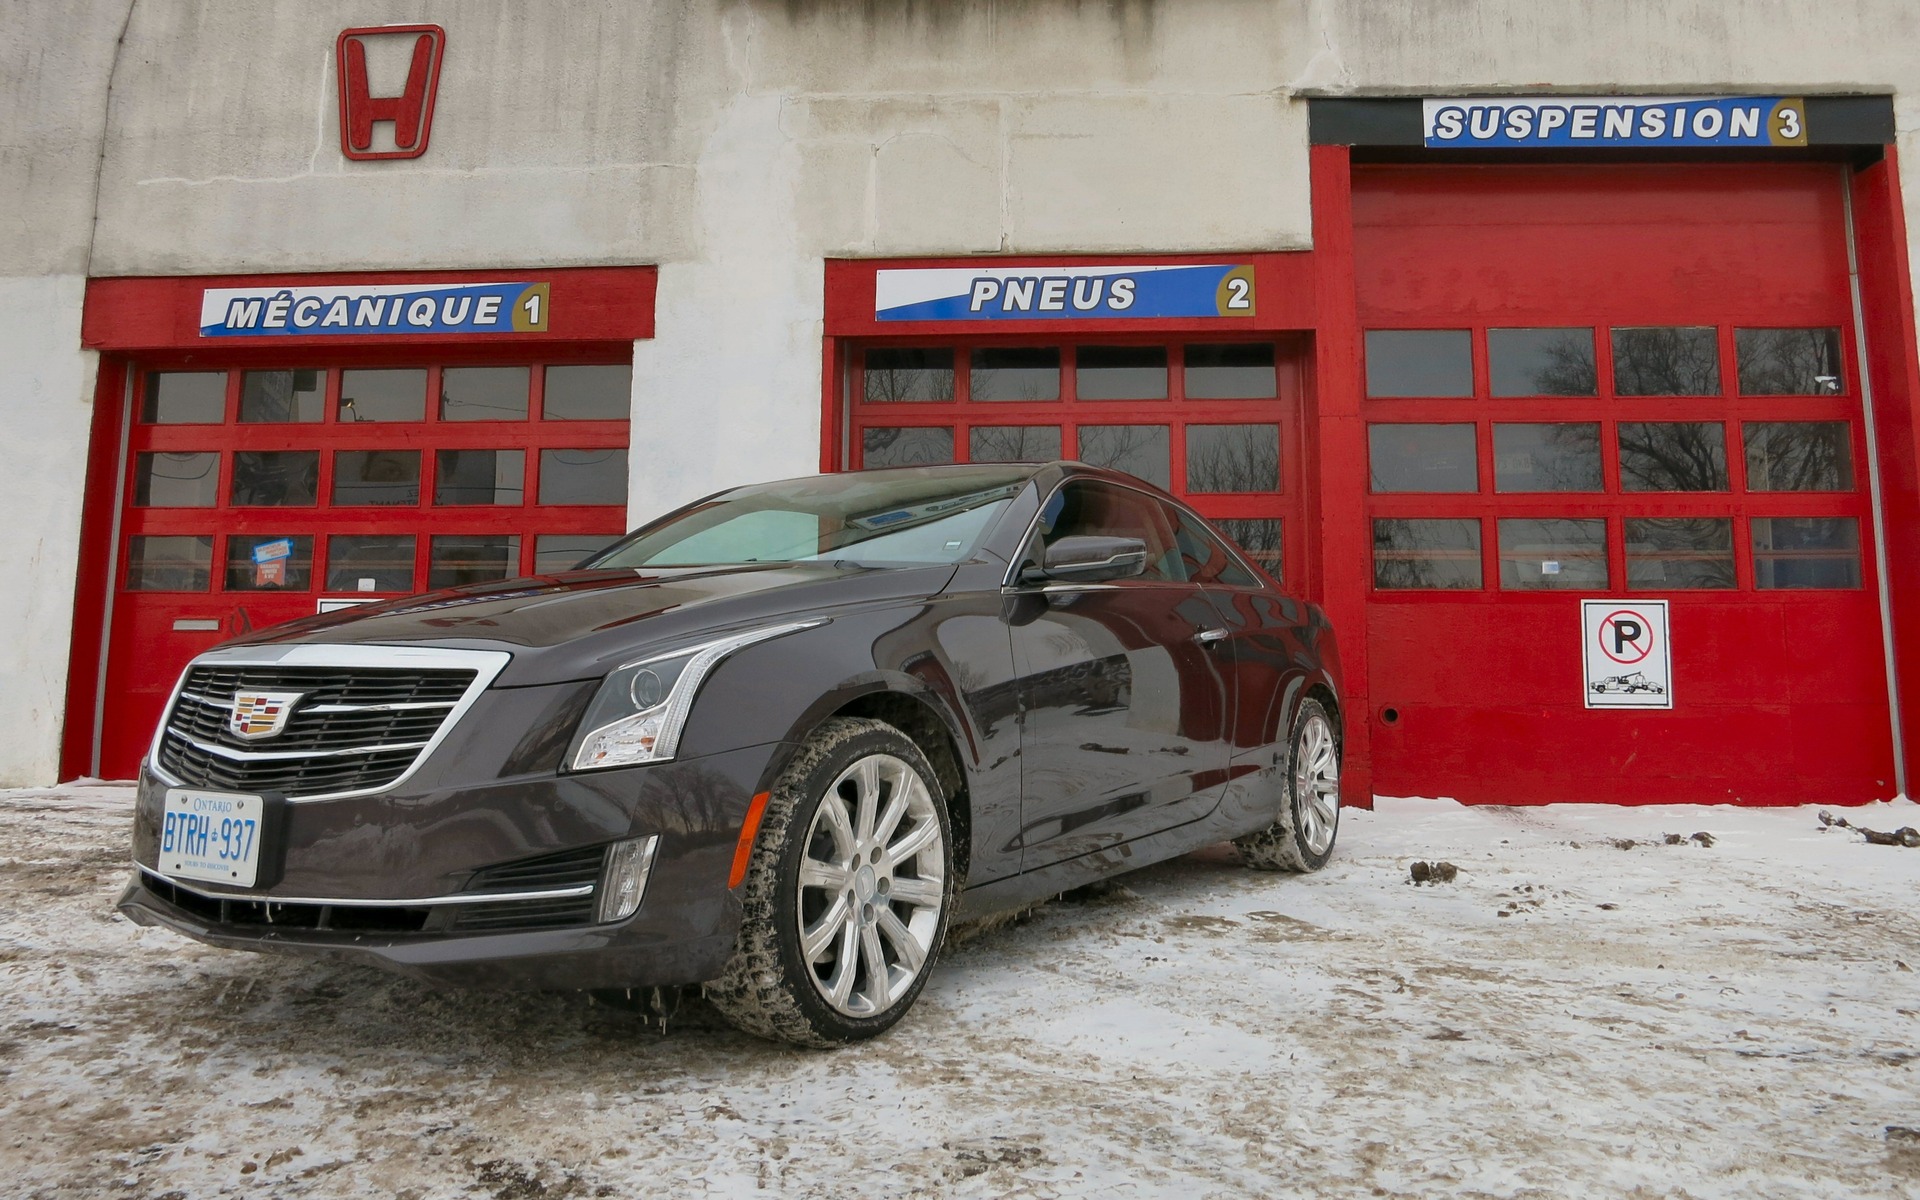 The ATS Coupe is a respectably quick automobile.